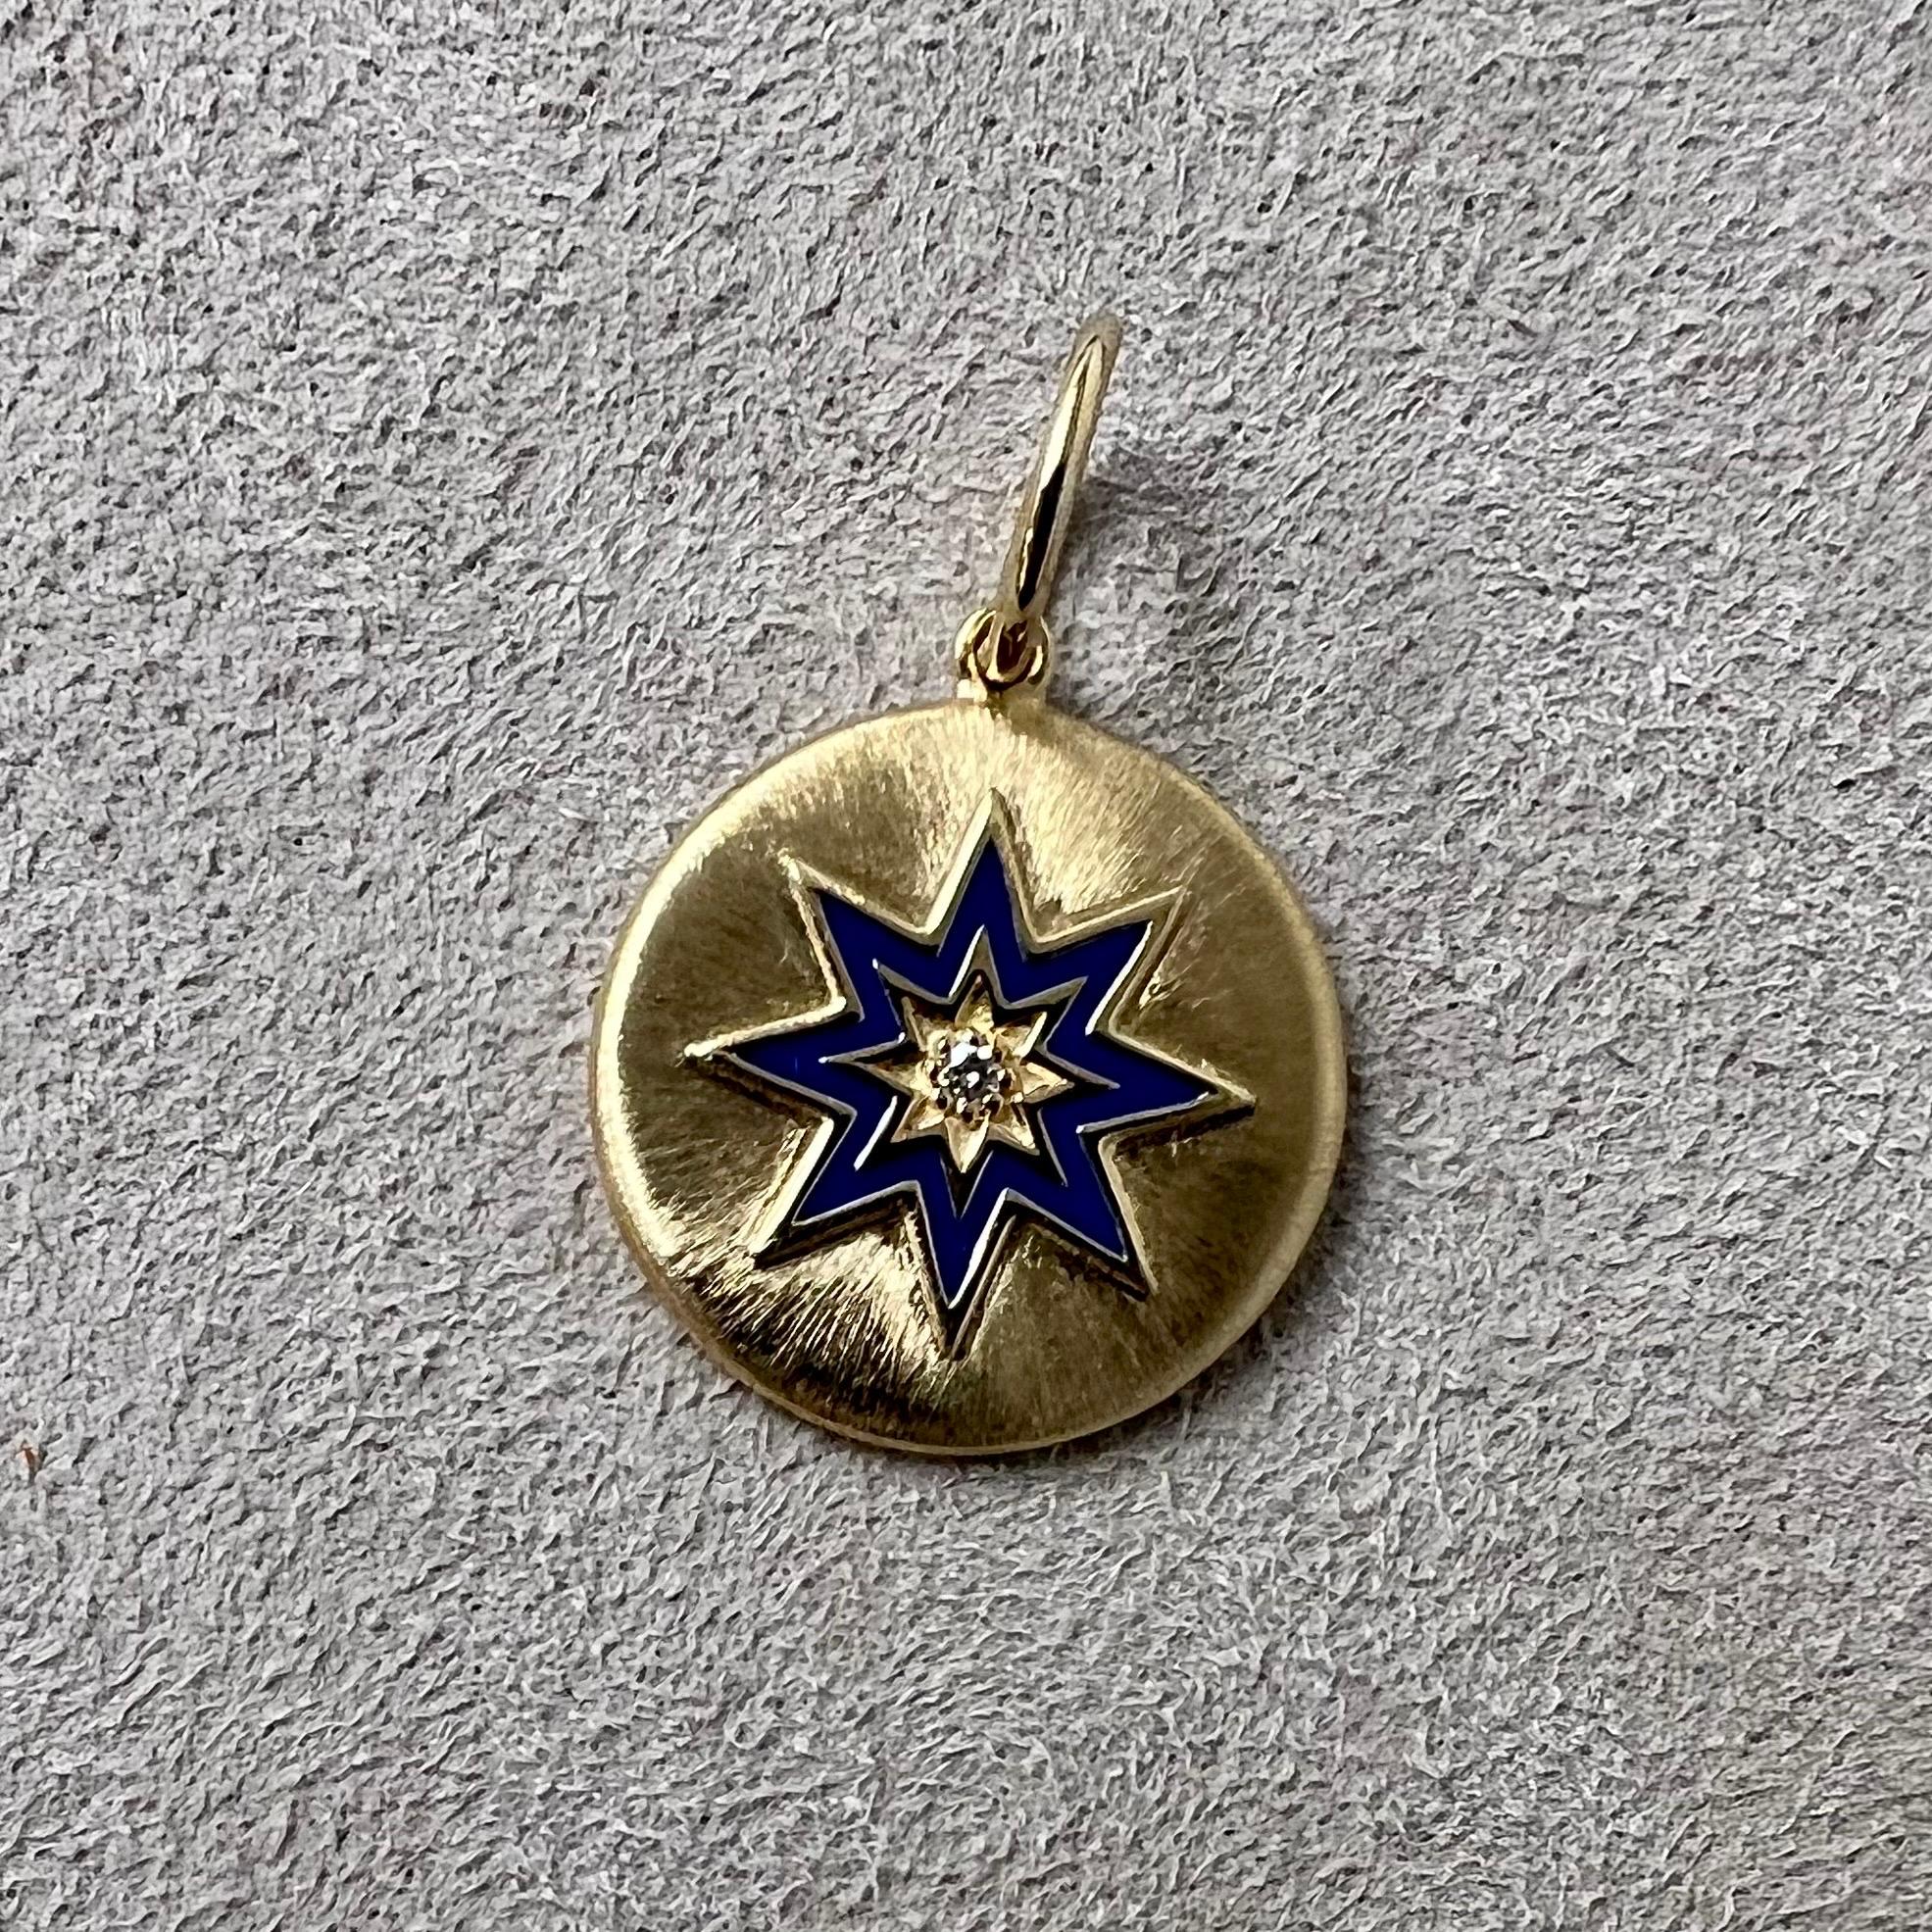 Created in 18 karat yellow gold
Lapis enamel details
Diamond 0.01 carat approx.
Chain sold separately 

Crafted from 18 karat yellow gold, this stunning pendant features luscious lapis enamel details and a touch of diamond sparkle, with a 0.01 carat